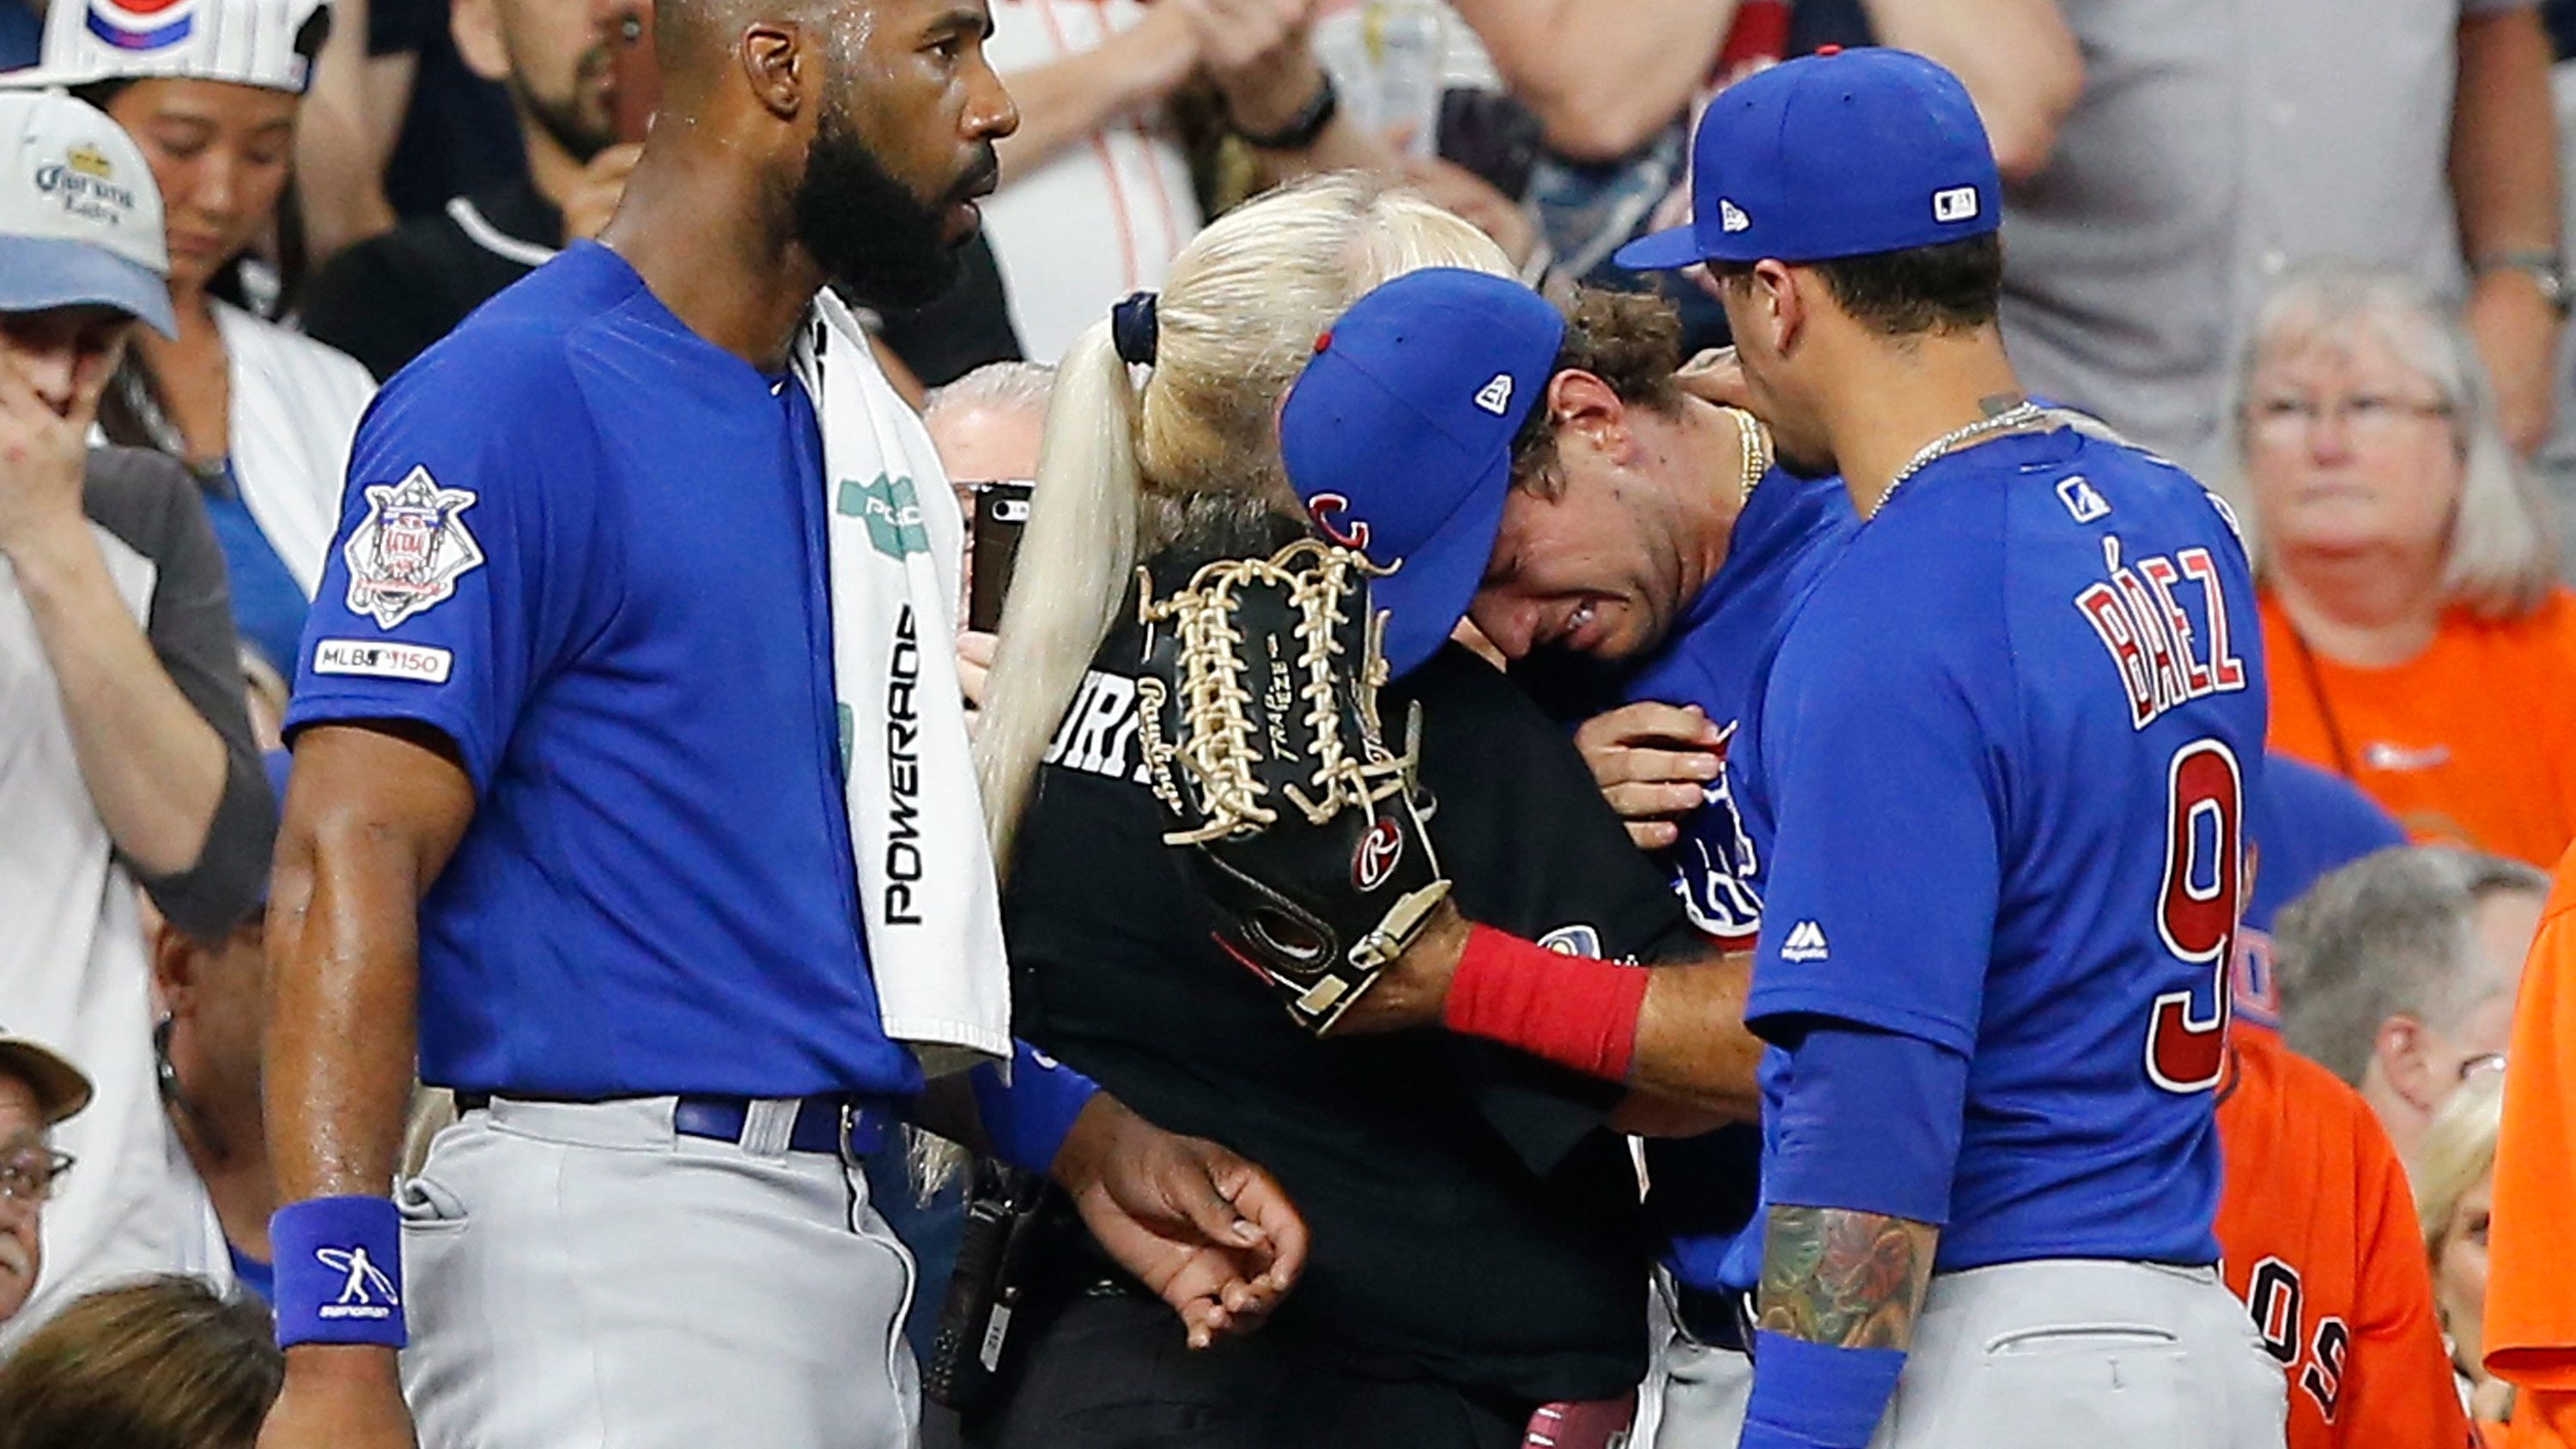 A foul ball that smacked a girl in the stands cracked her skull, lawyer  says